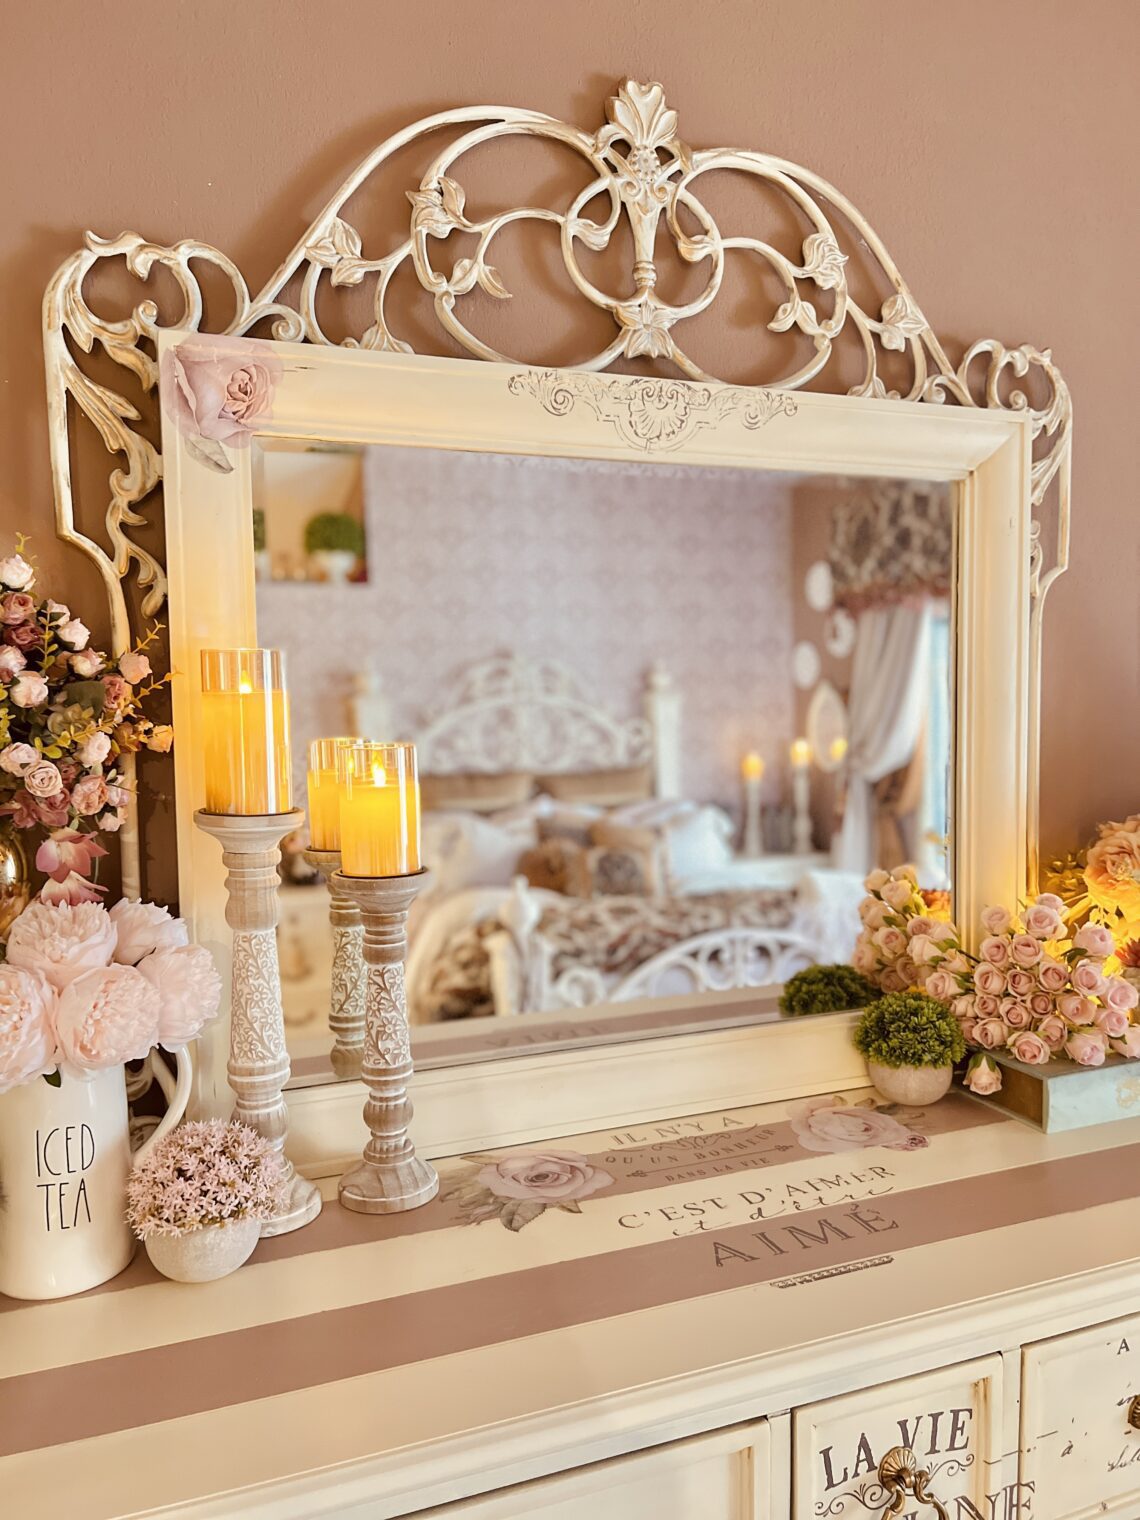 French country bedroom dresser mirror armoire furniture makeover dark antique walnut wrought iron accents home décor improvement chalk paint all in one wax glaze antique restoration before and after Provincial white cream gilding wax gold techniques tips Rae Dunn Disney Princess Mug Cinderella Bibbidi Bobbidi Boo